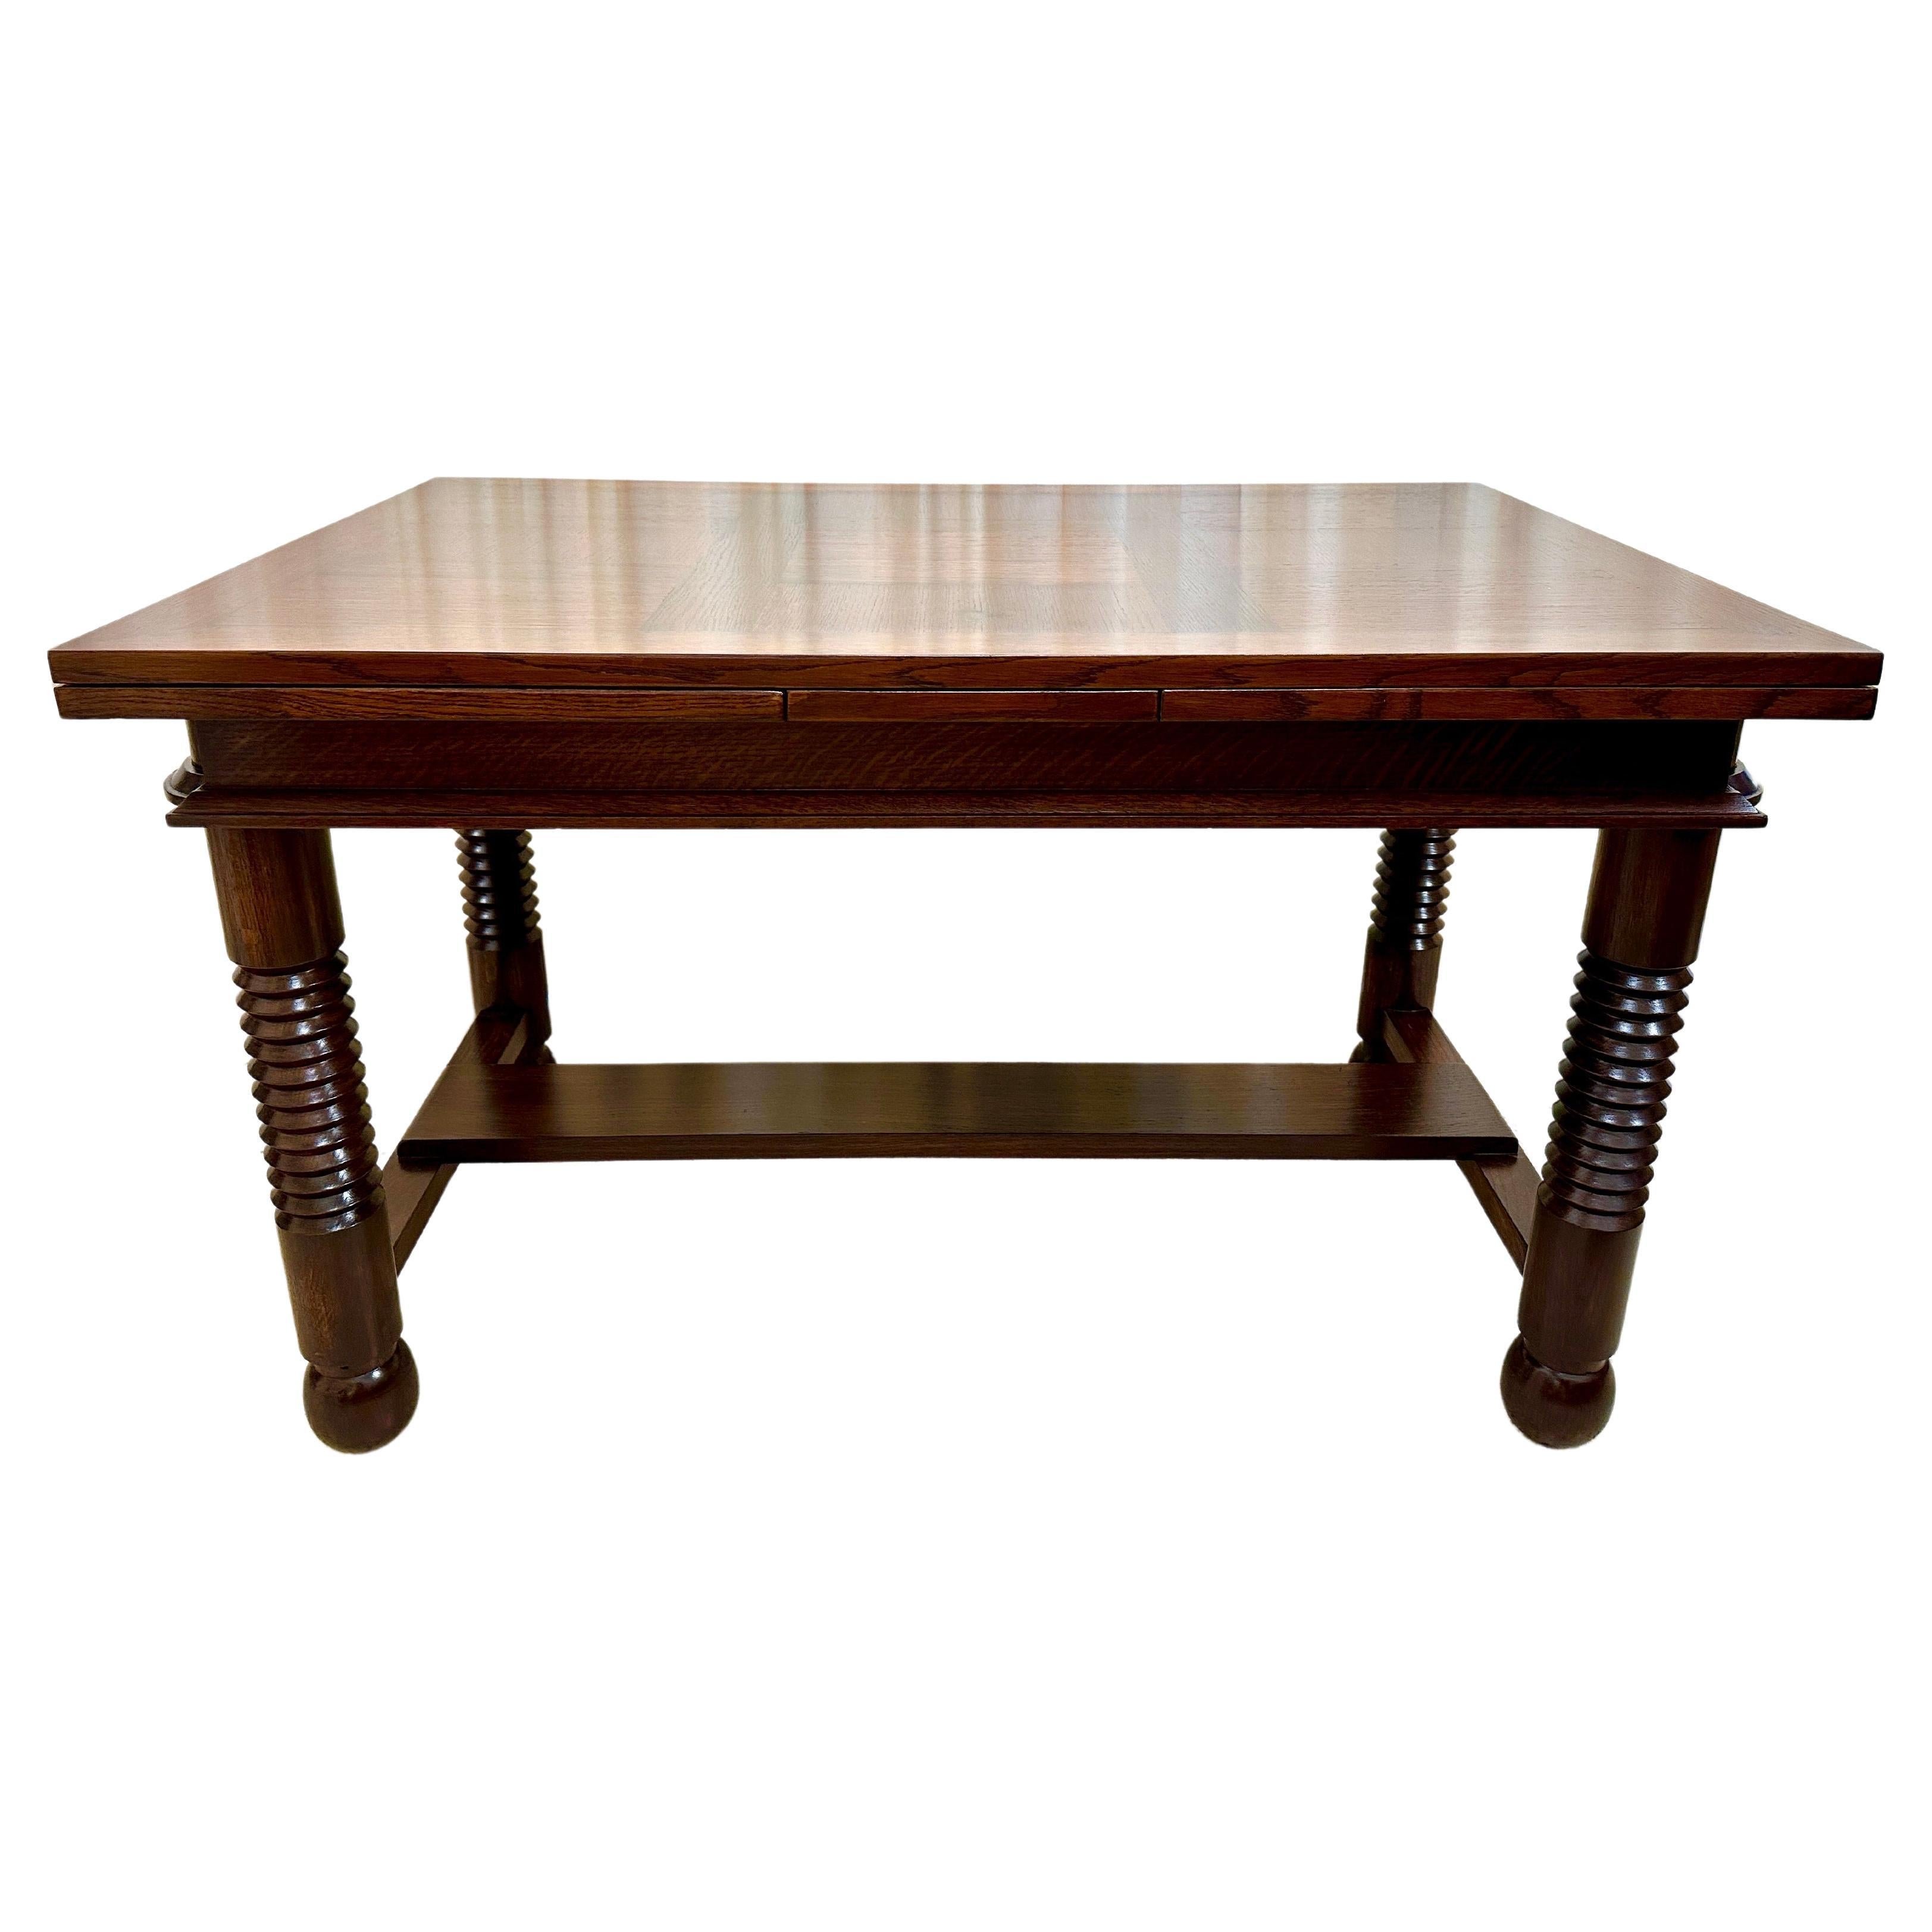 Original Charles Dudouyt Dining Table w/ Extensions in Solid Oak